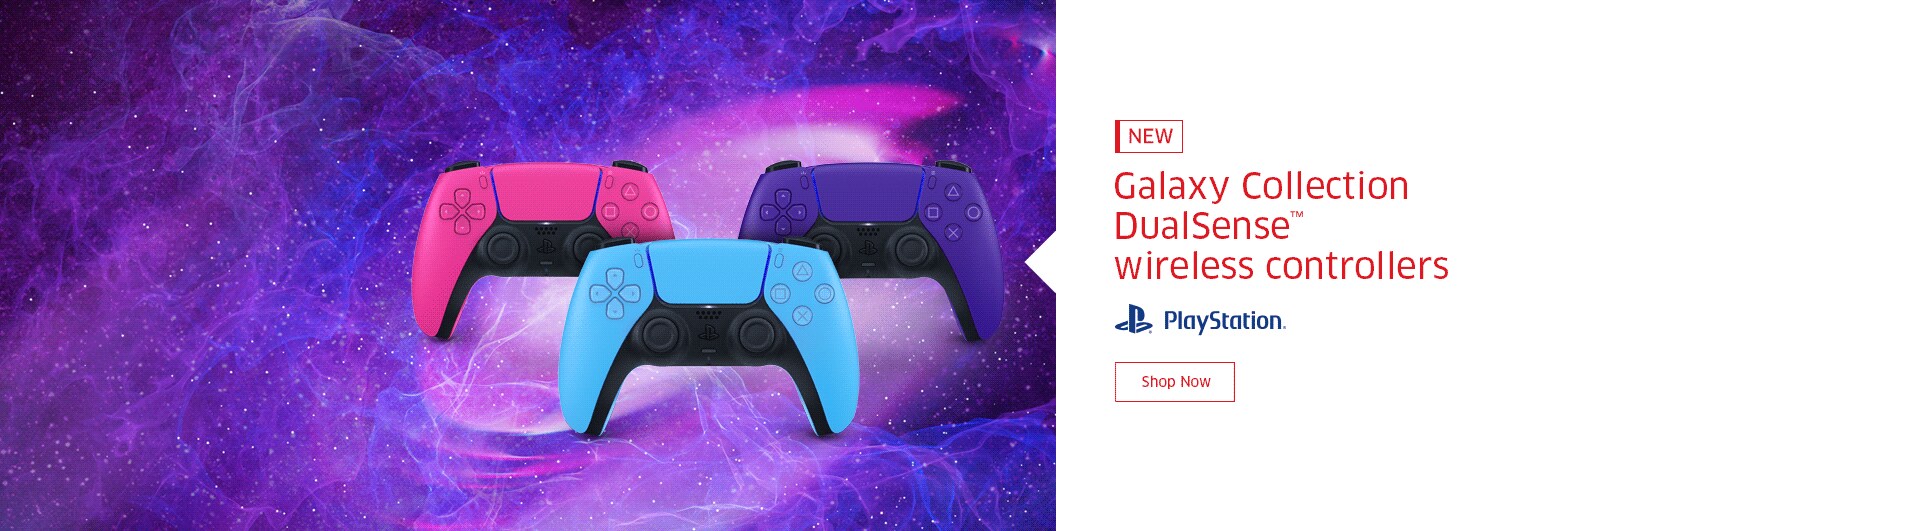 NEW Galaxy Collection DualSense™ wireless controllers  Shop Now